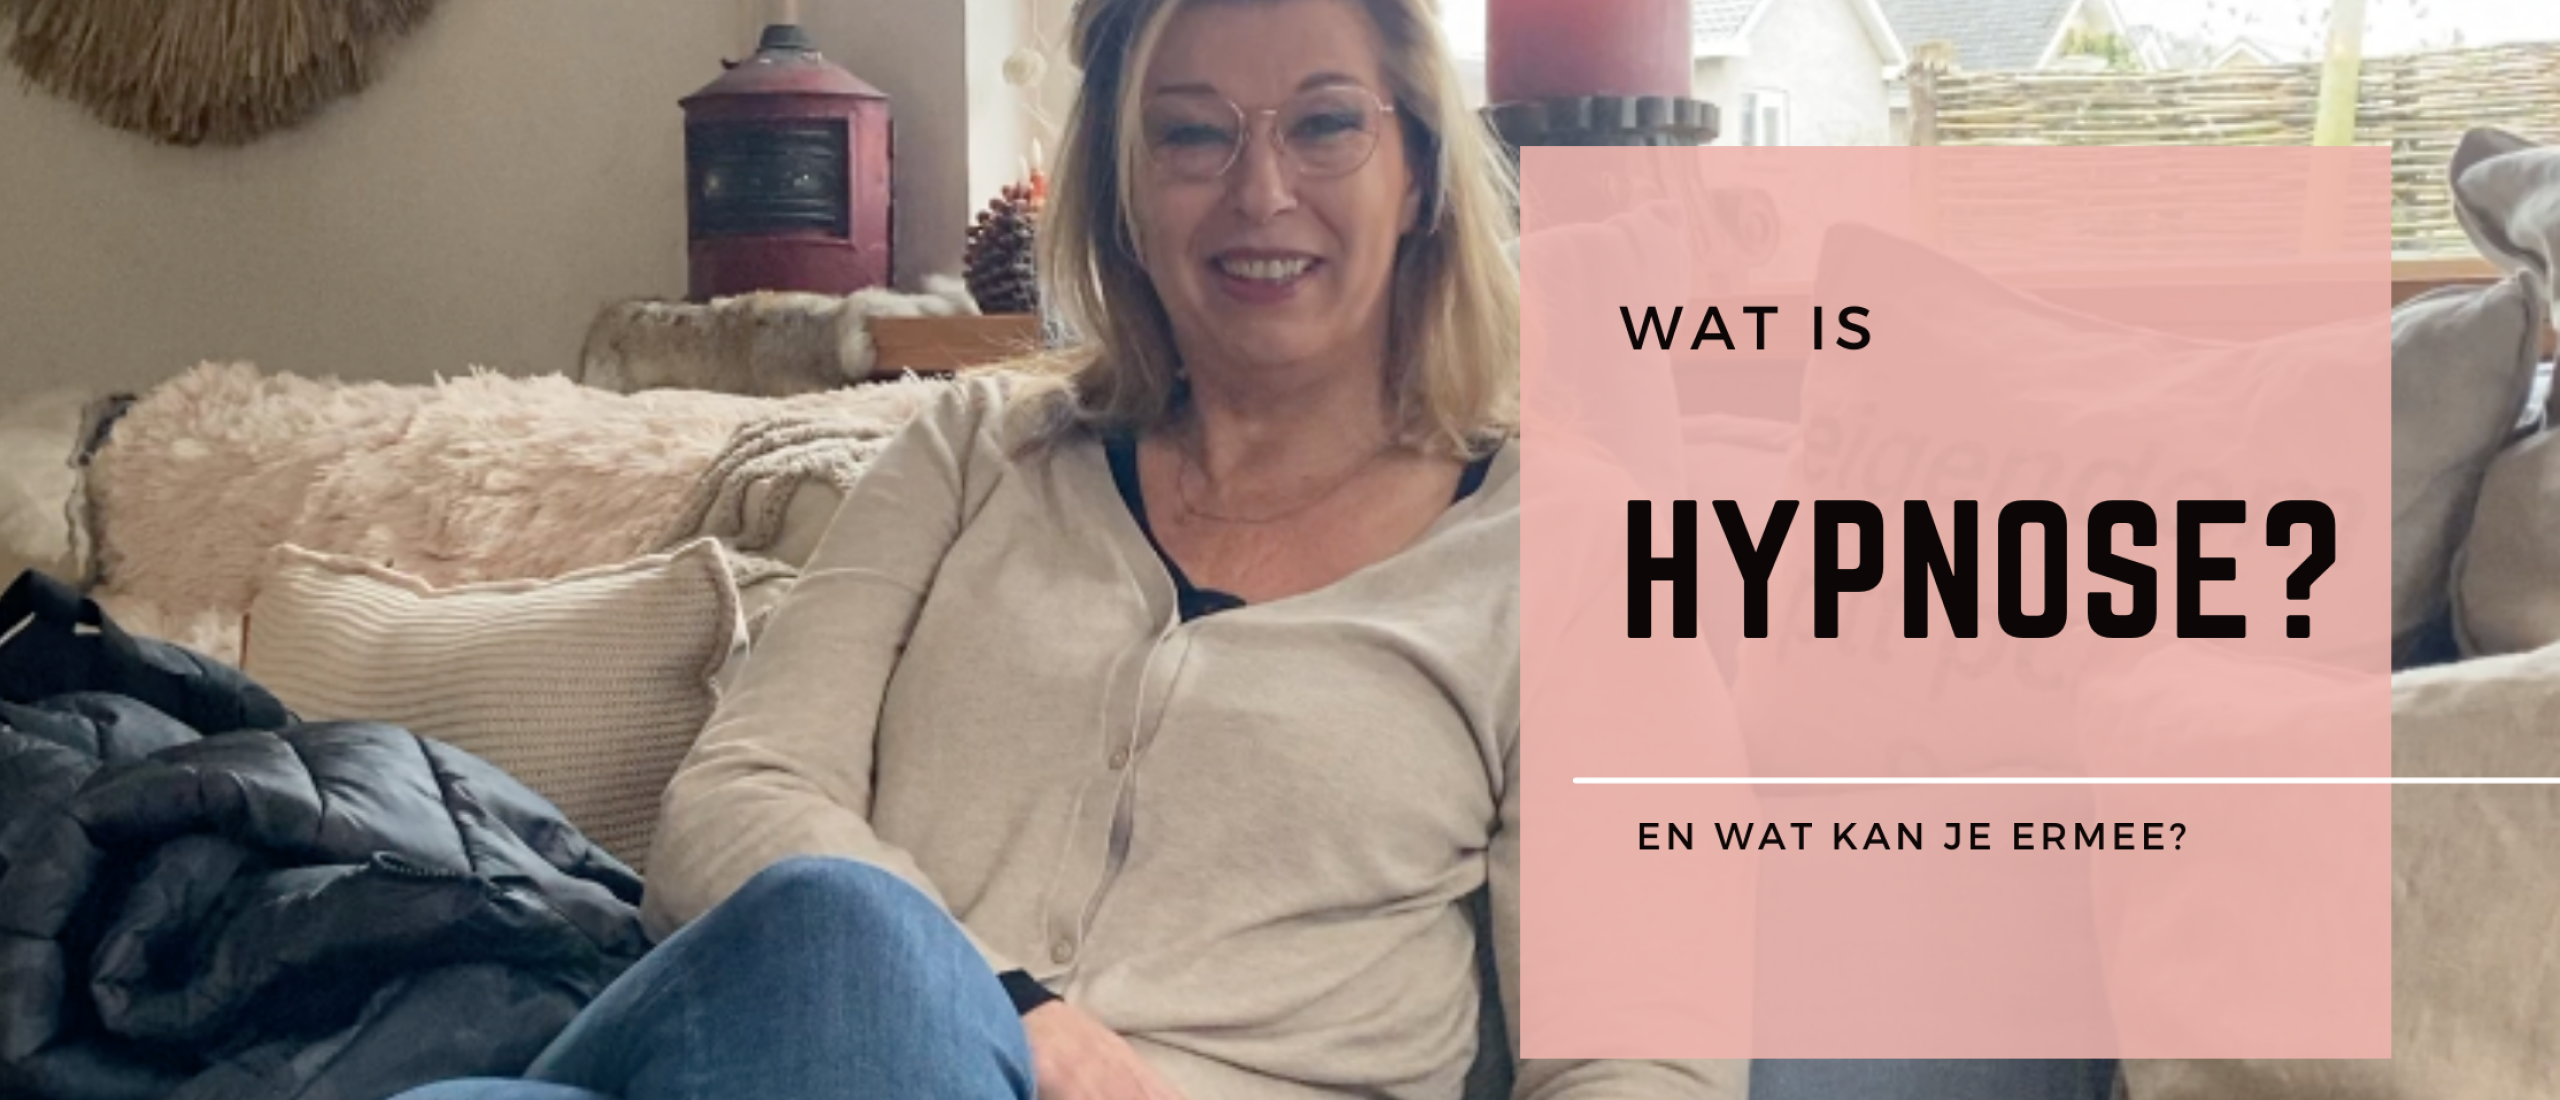 Wat is hypnose?